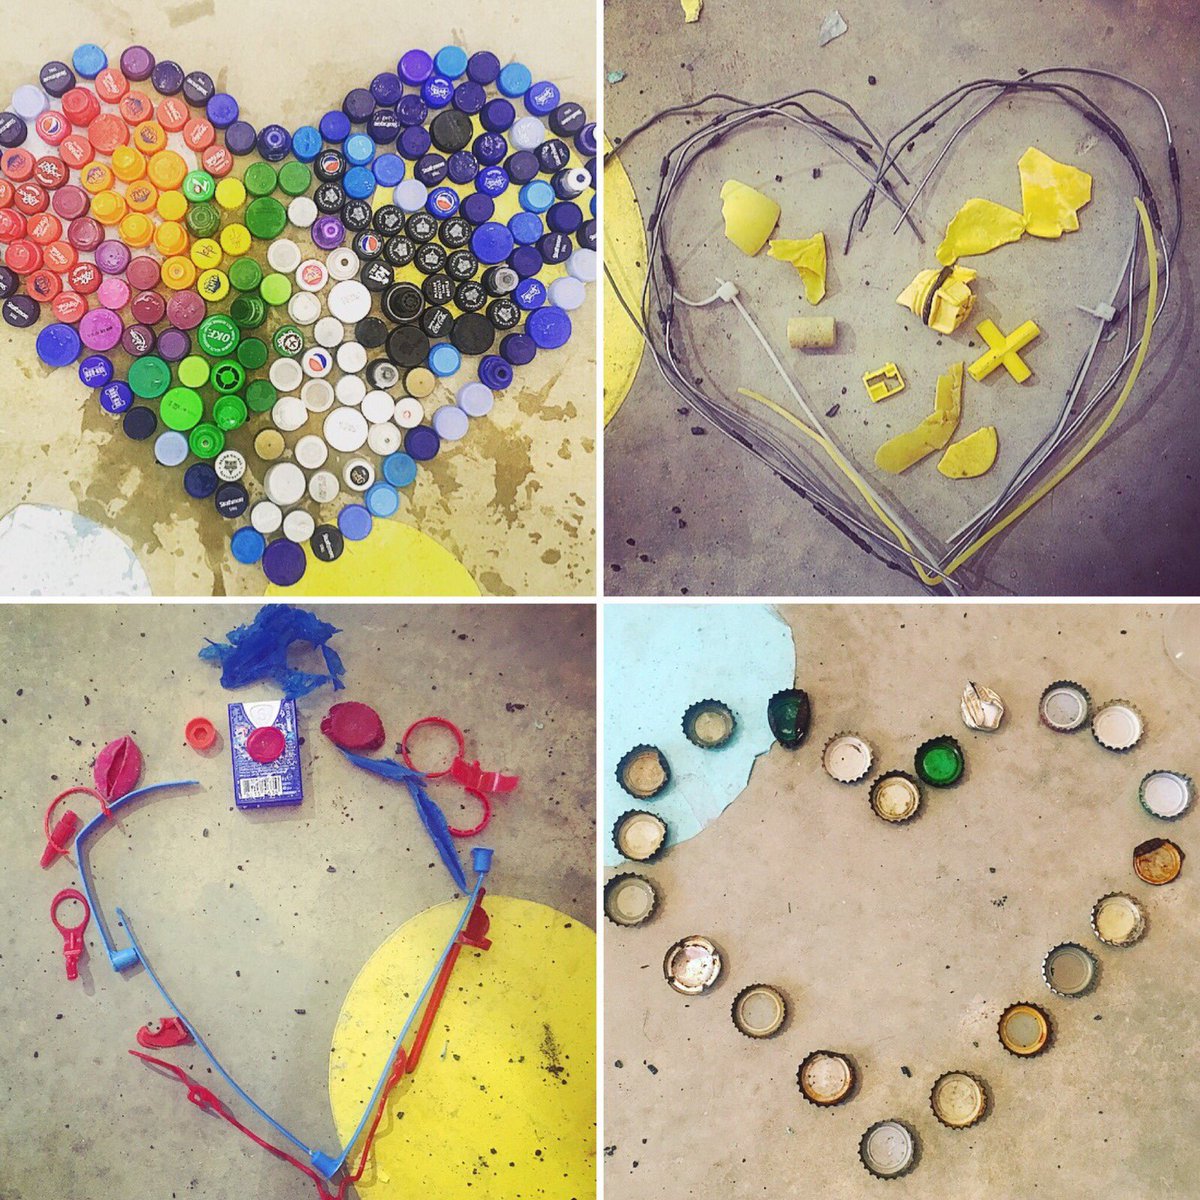 Hearts made of plastic we collected from Brighton beach on feb 13. @BudeCleanerSeas @StephanieCoate7 @Pier2PierBTN #showyourbeachsomelove #loveyourbeach #ValentinesDay #aplasticocean